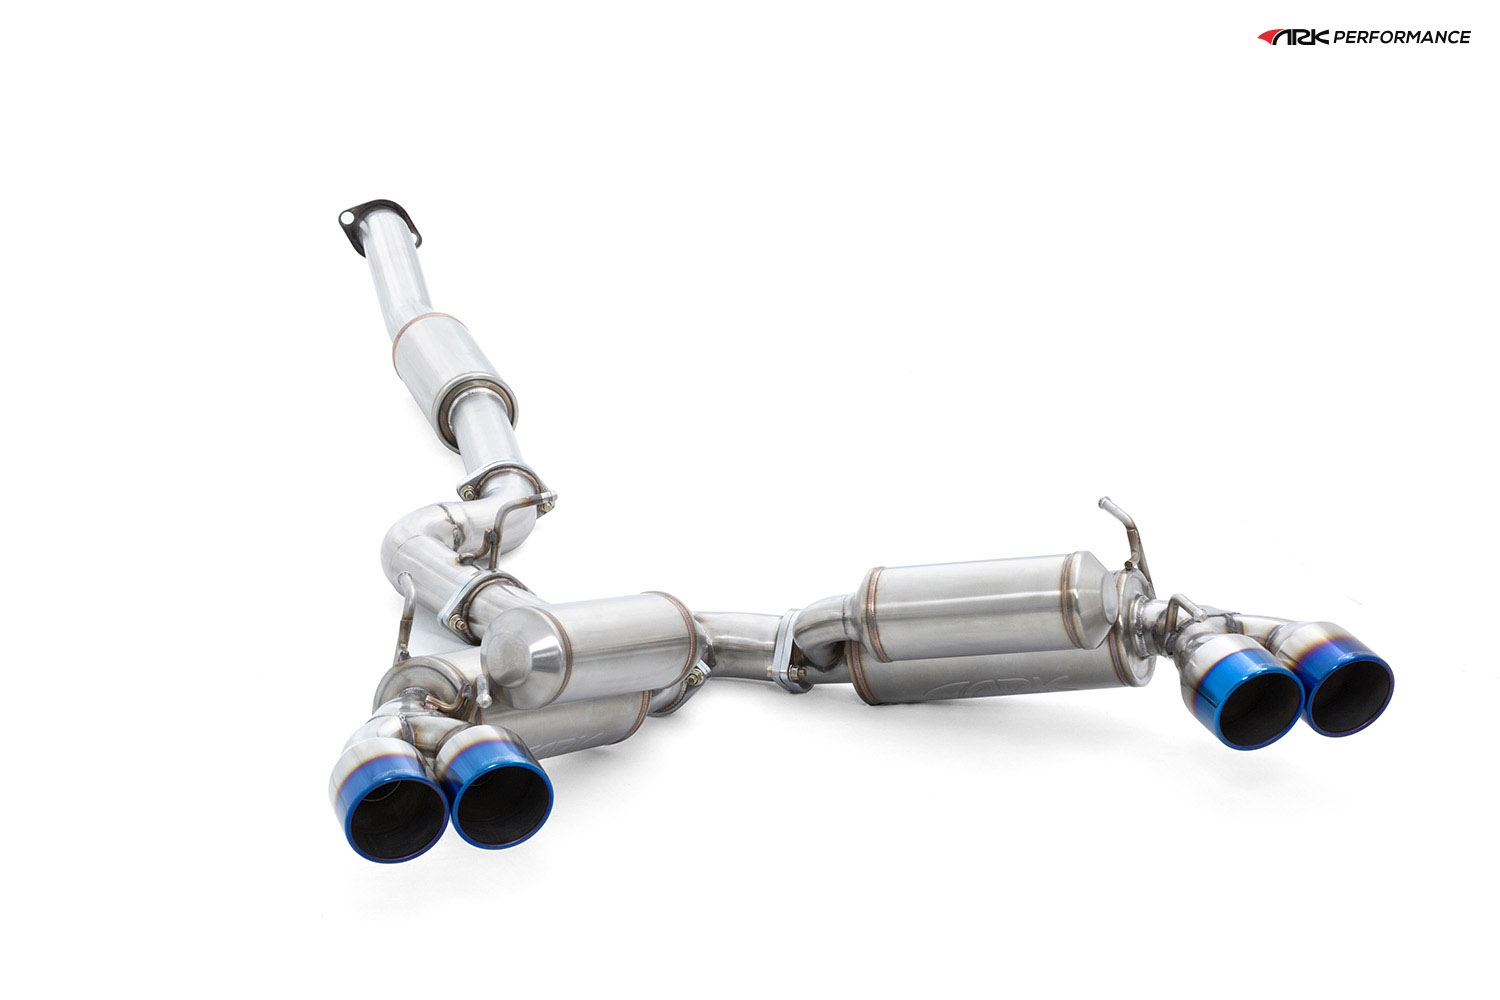 Ark Performance Stainless Steel GRiP Cat-Back Exhaust System 3.0in Pipe w/ 4.0 Burnt Quad Tip, Dual Exit - Subaru WRX / STI Hatchback 08-14 2.5L H4 TURBO GR